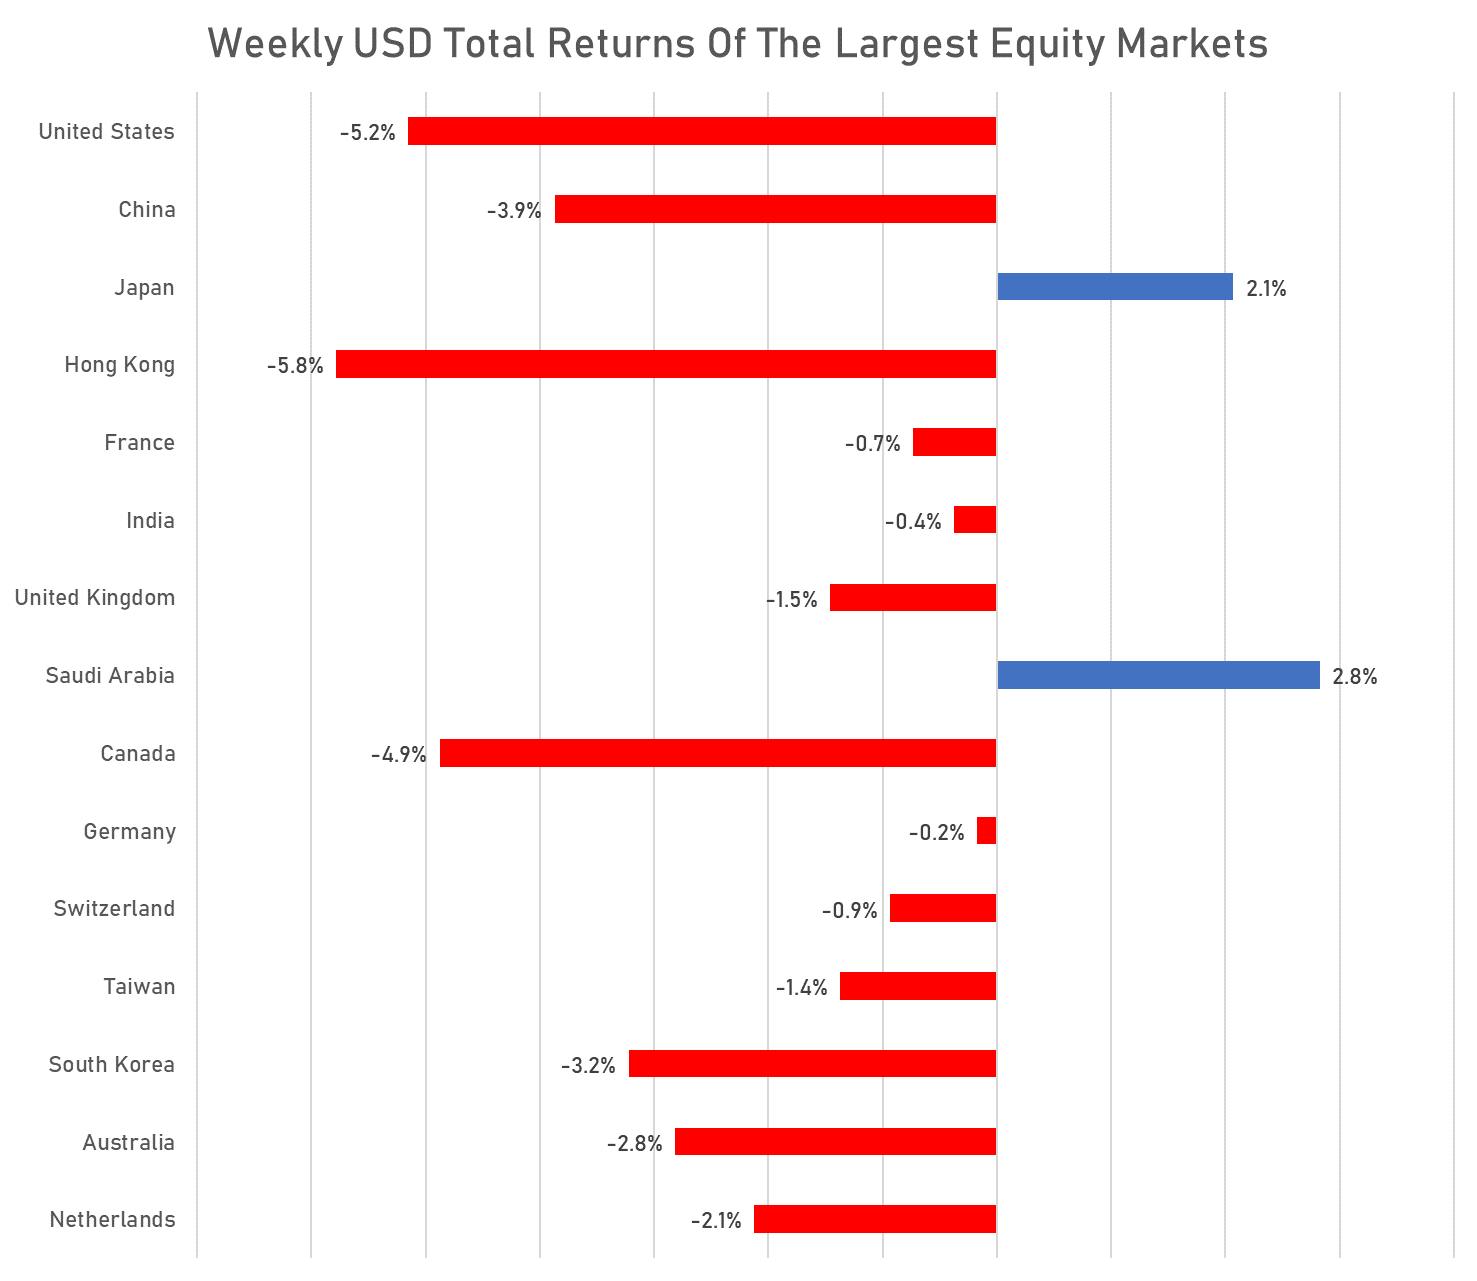 USD Total Returns of Major Equity Markets This Week | Sources: phipost.com, FactSet data